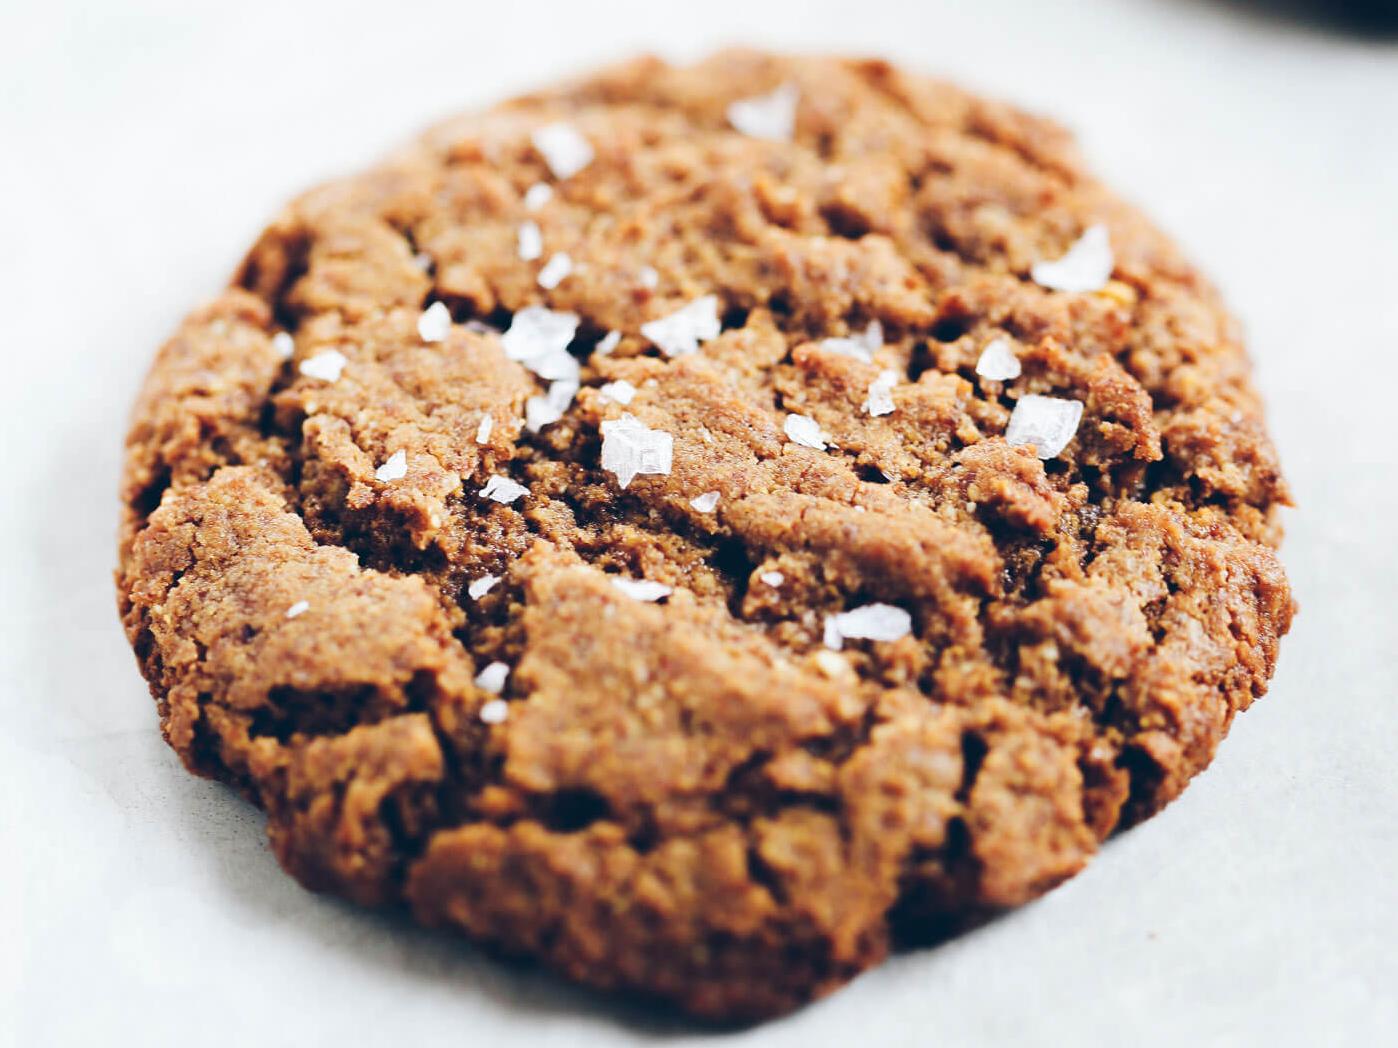  These gluten-free almond butter cookies might just be the tastiest treat you've ever consumed!